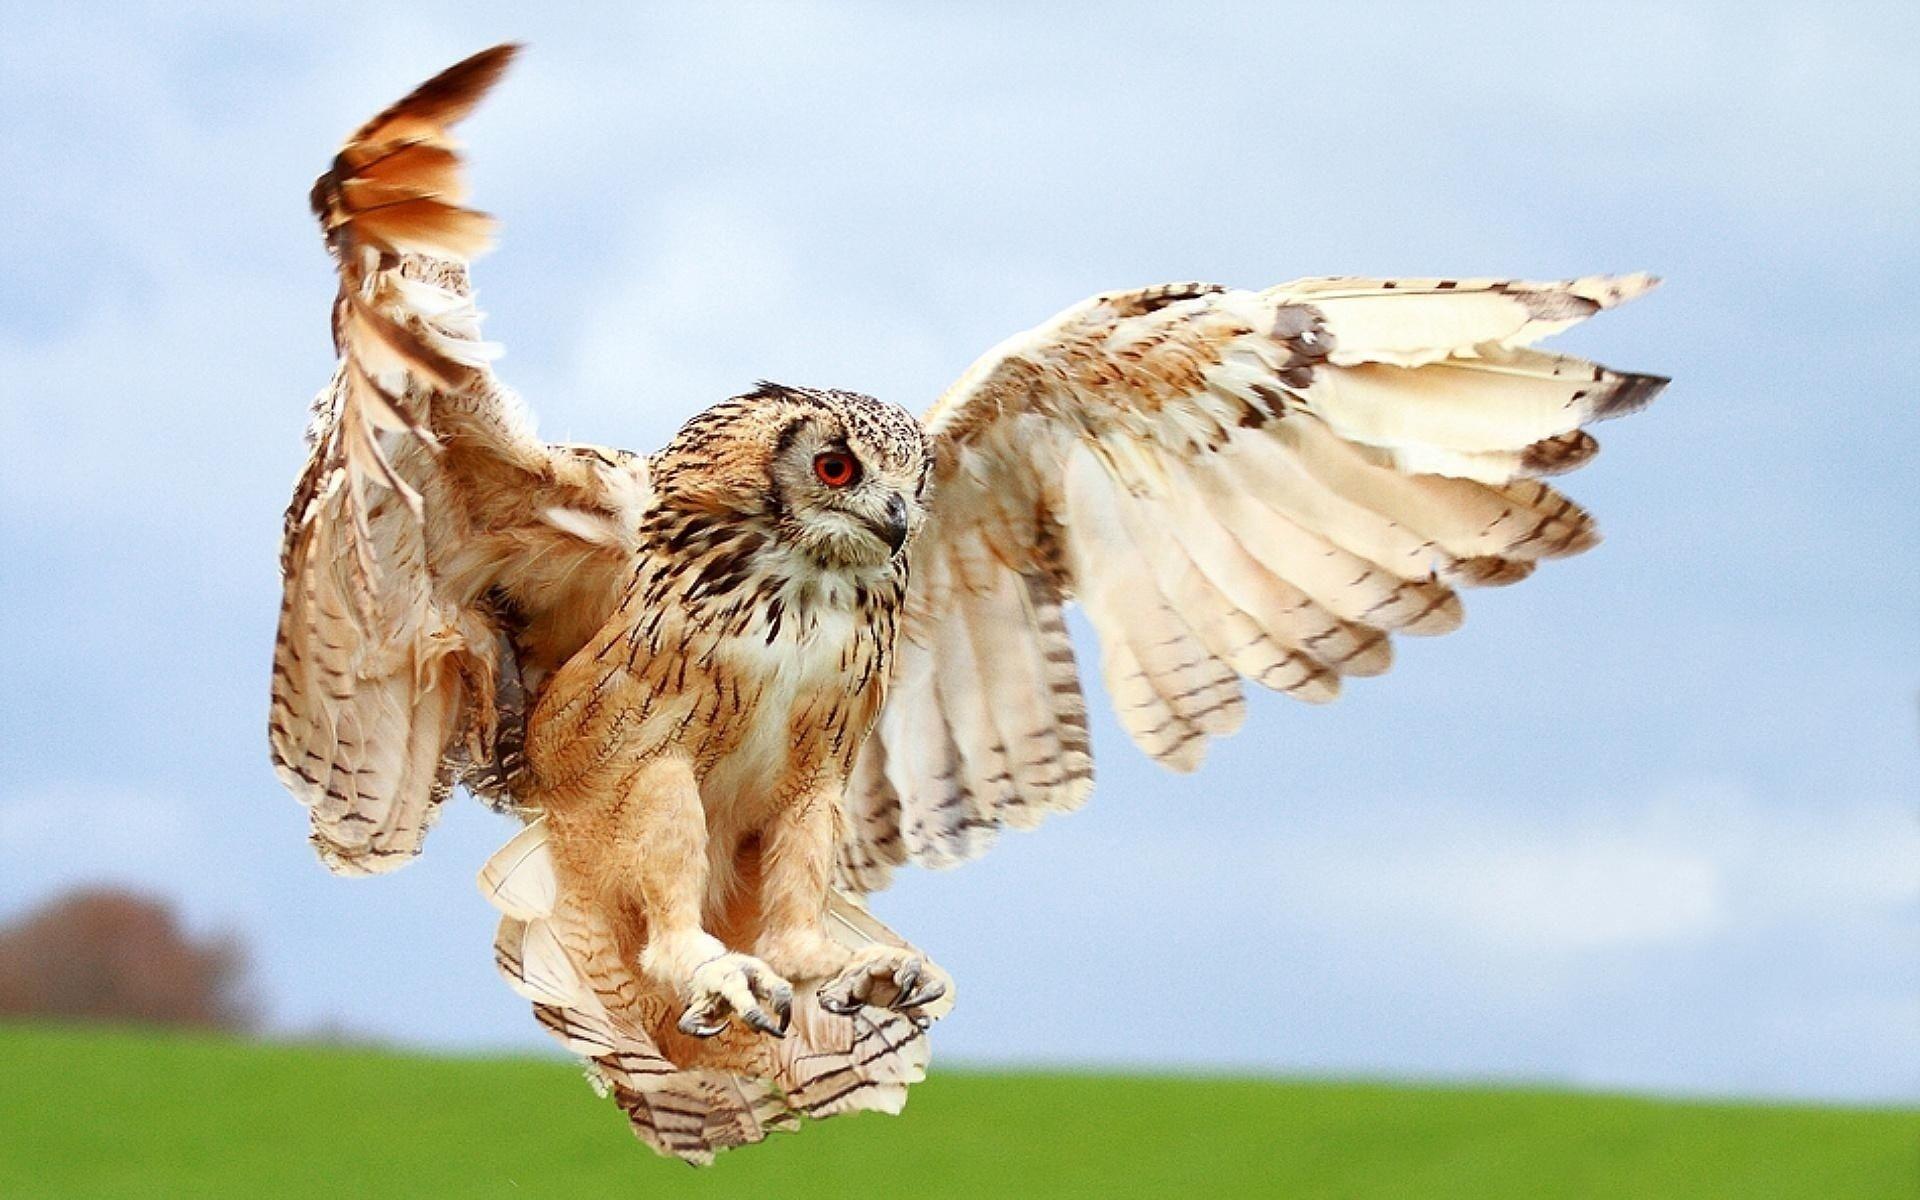 Birds of Prey wallpaper and image, picture, photo